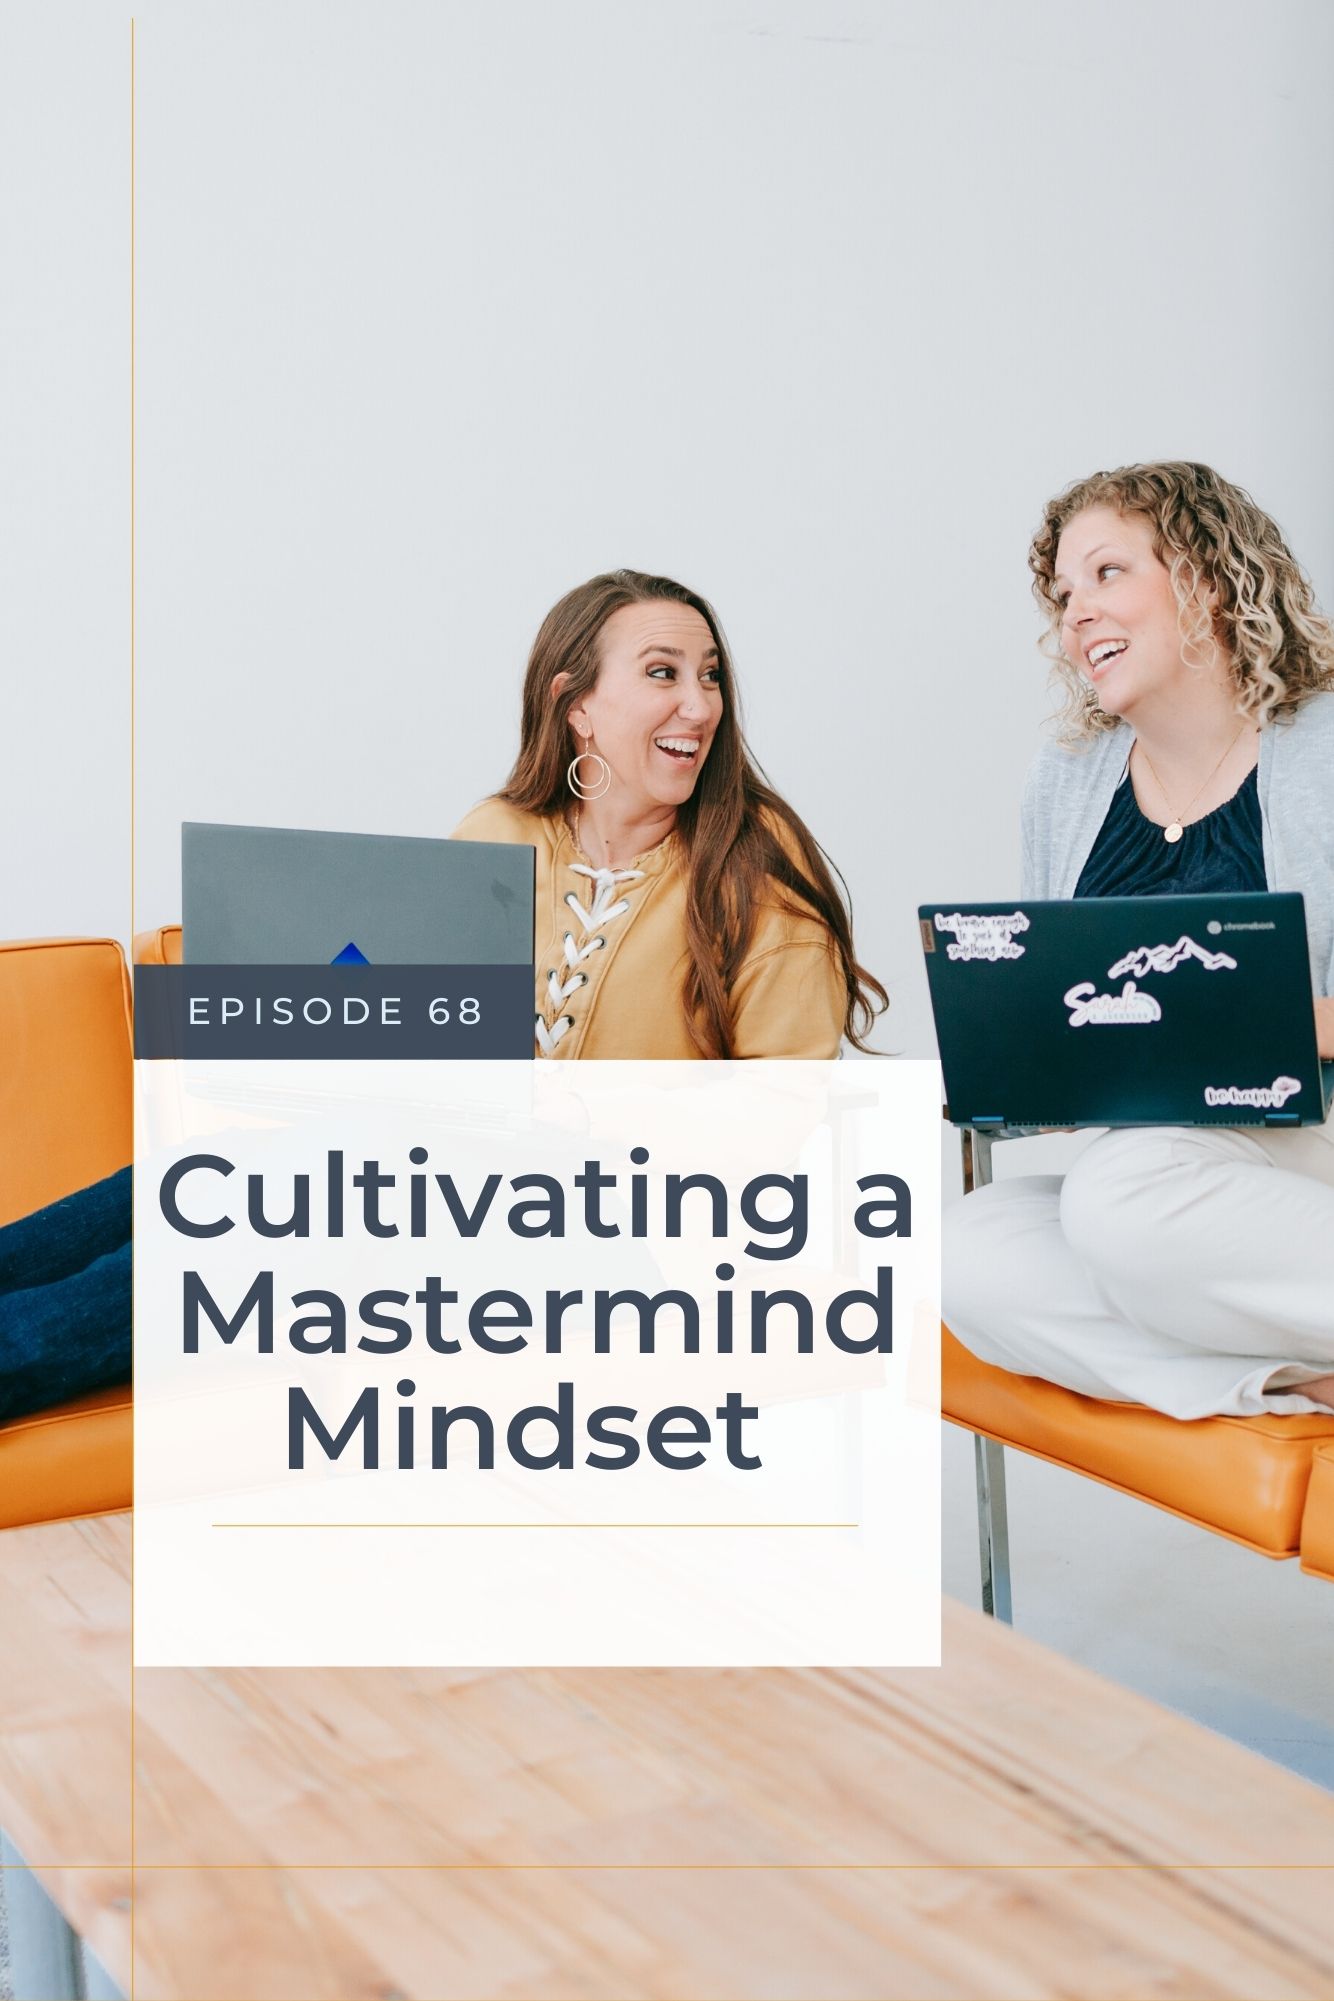 Two women Christian business owners looking at each other as they are talking about mastermind mindset for their Christian Business podcast for women.